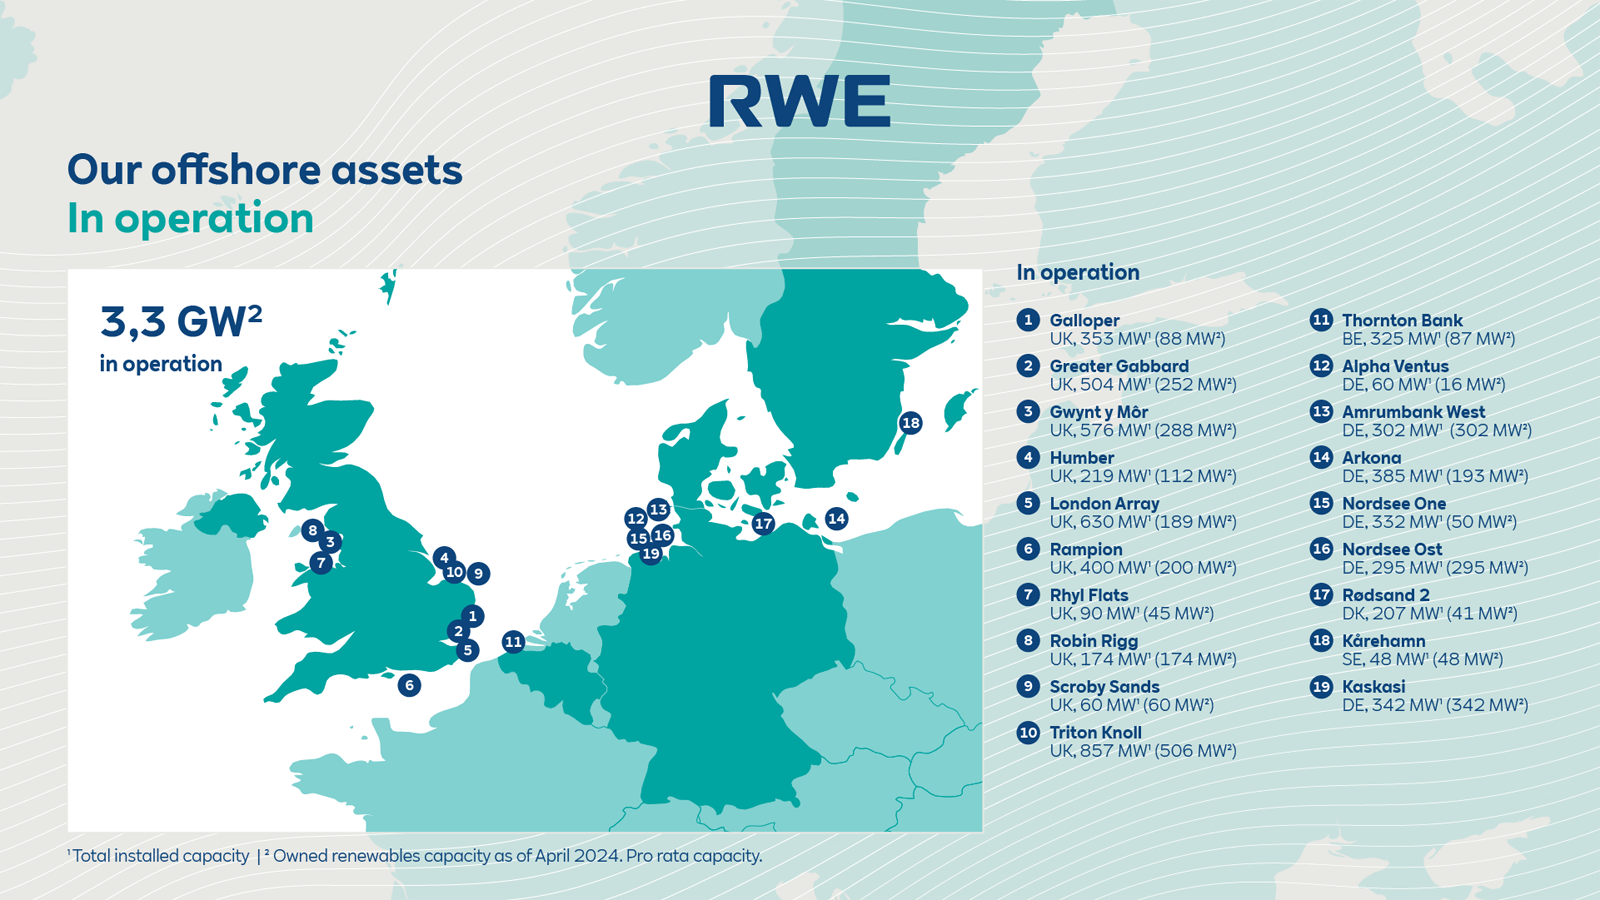 RWE Offshore Wind farms in operation